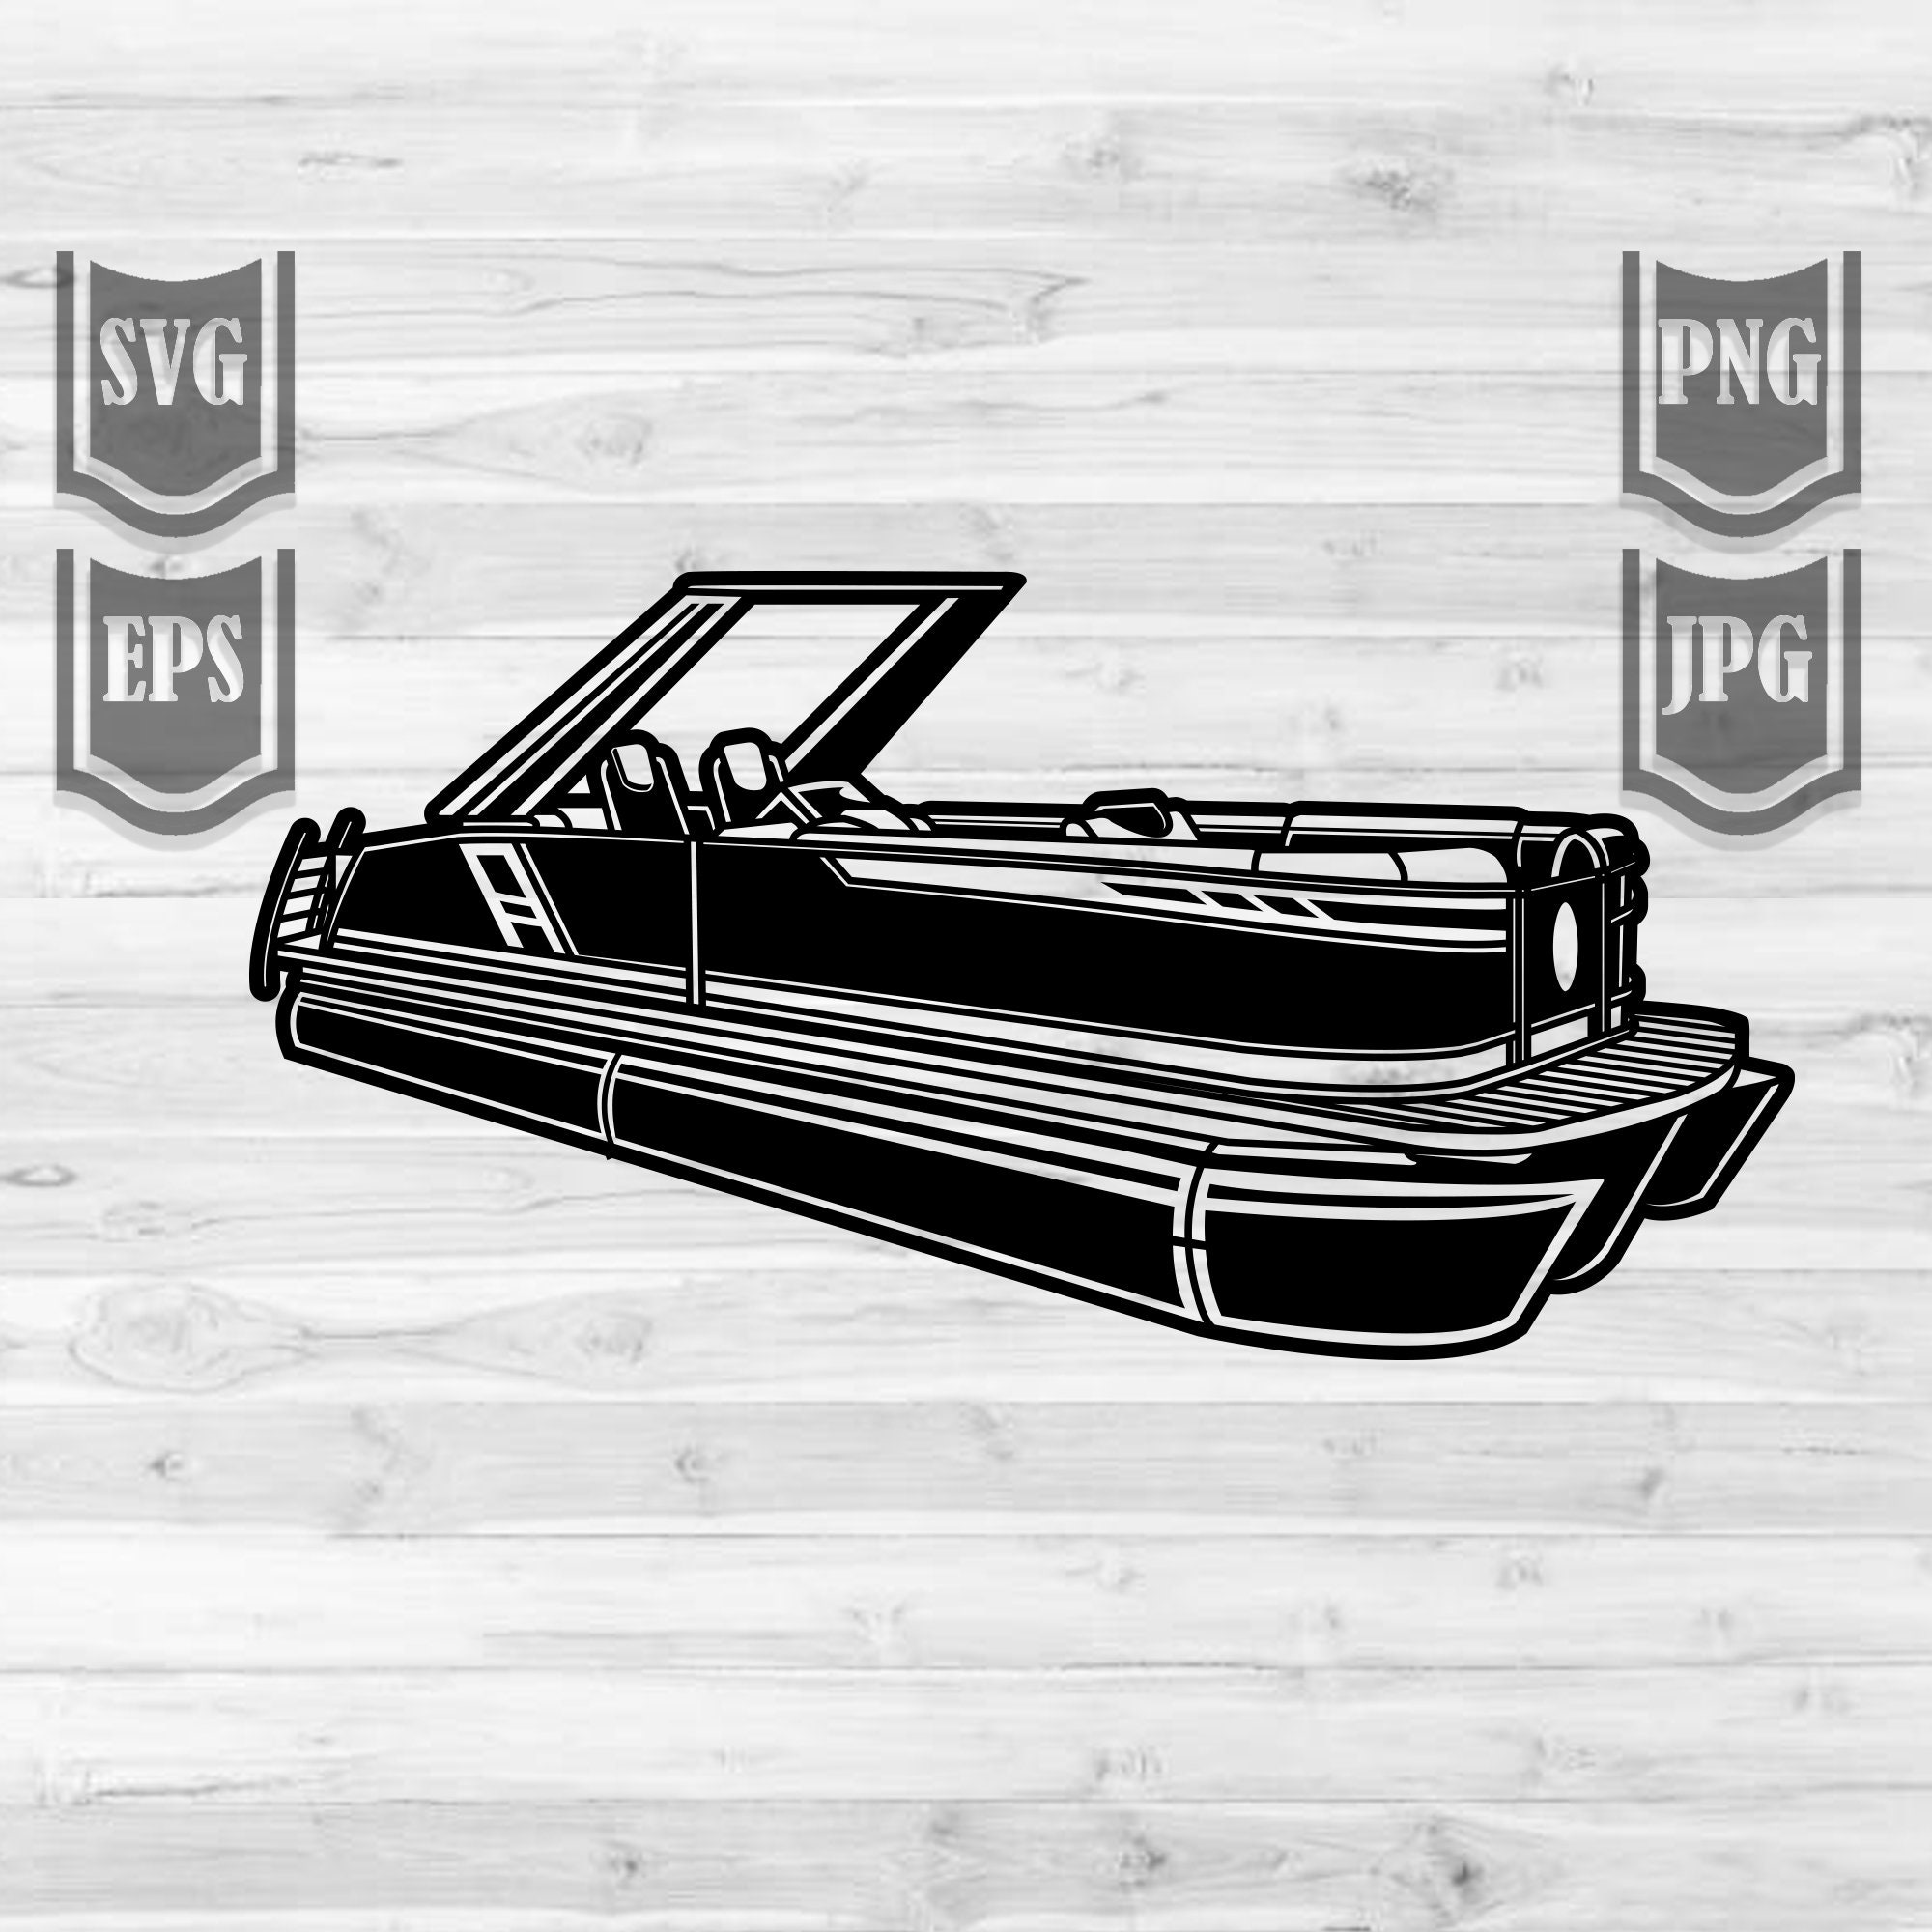 Pontoon Boat 6 Svg Pontoon Boat Svg Pontoon Boat Clipart Etsy Images